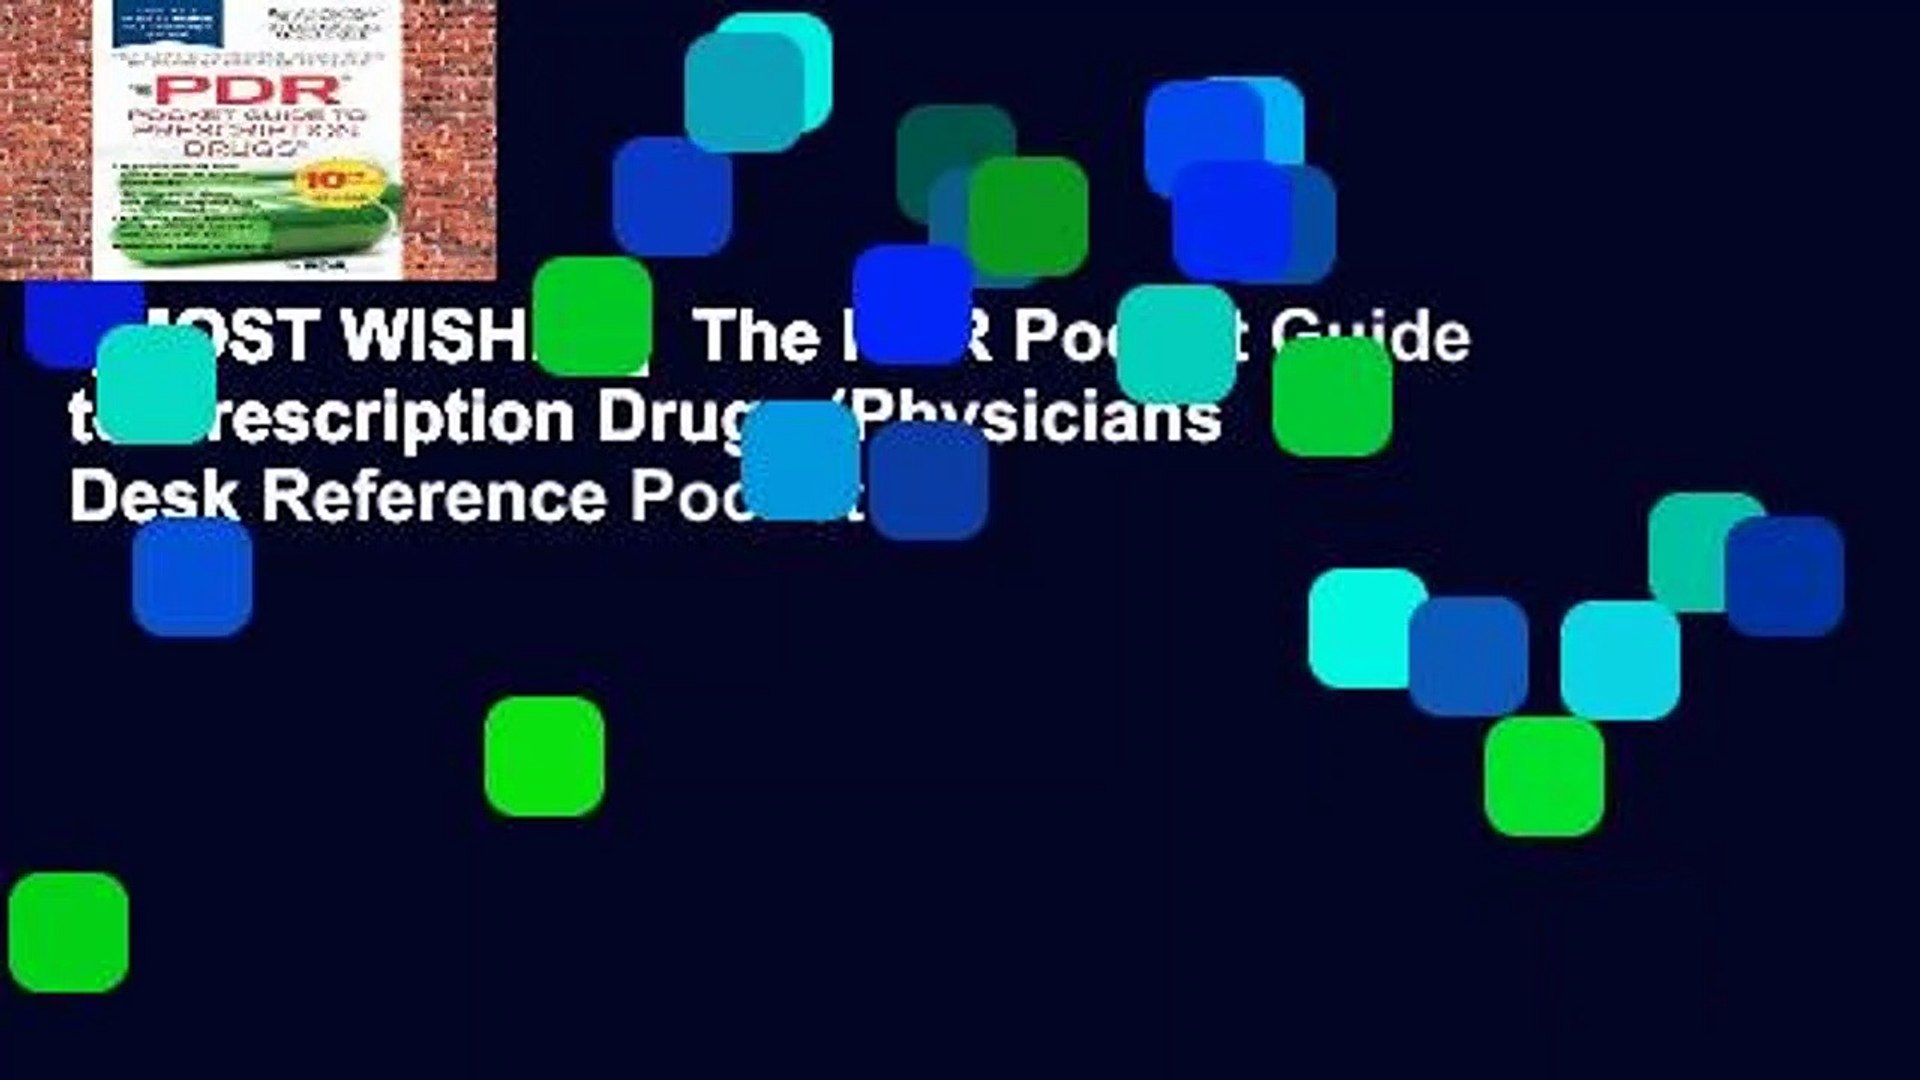 Most Wished The Pdr Pocket Guide To Prescription Drugs